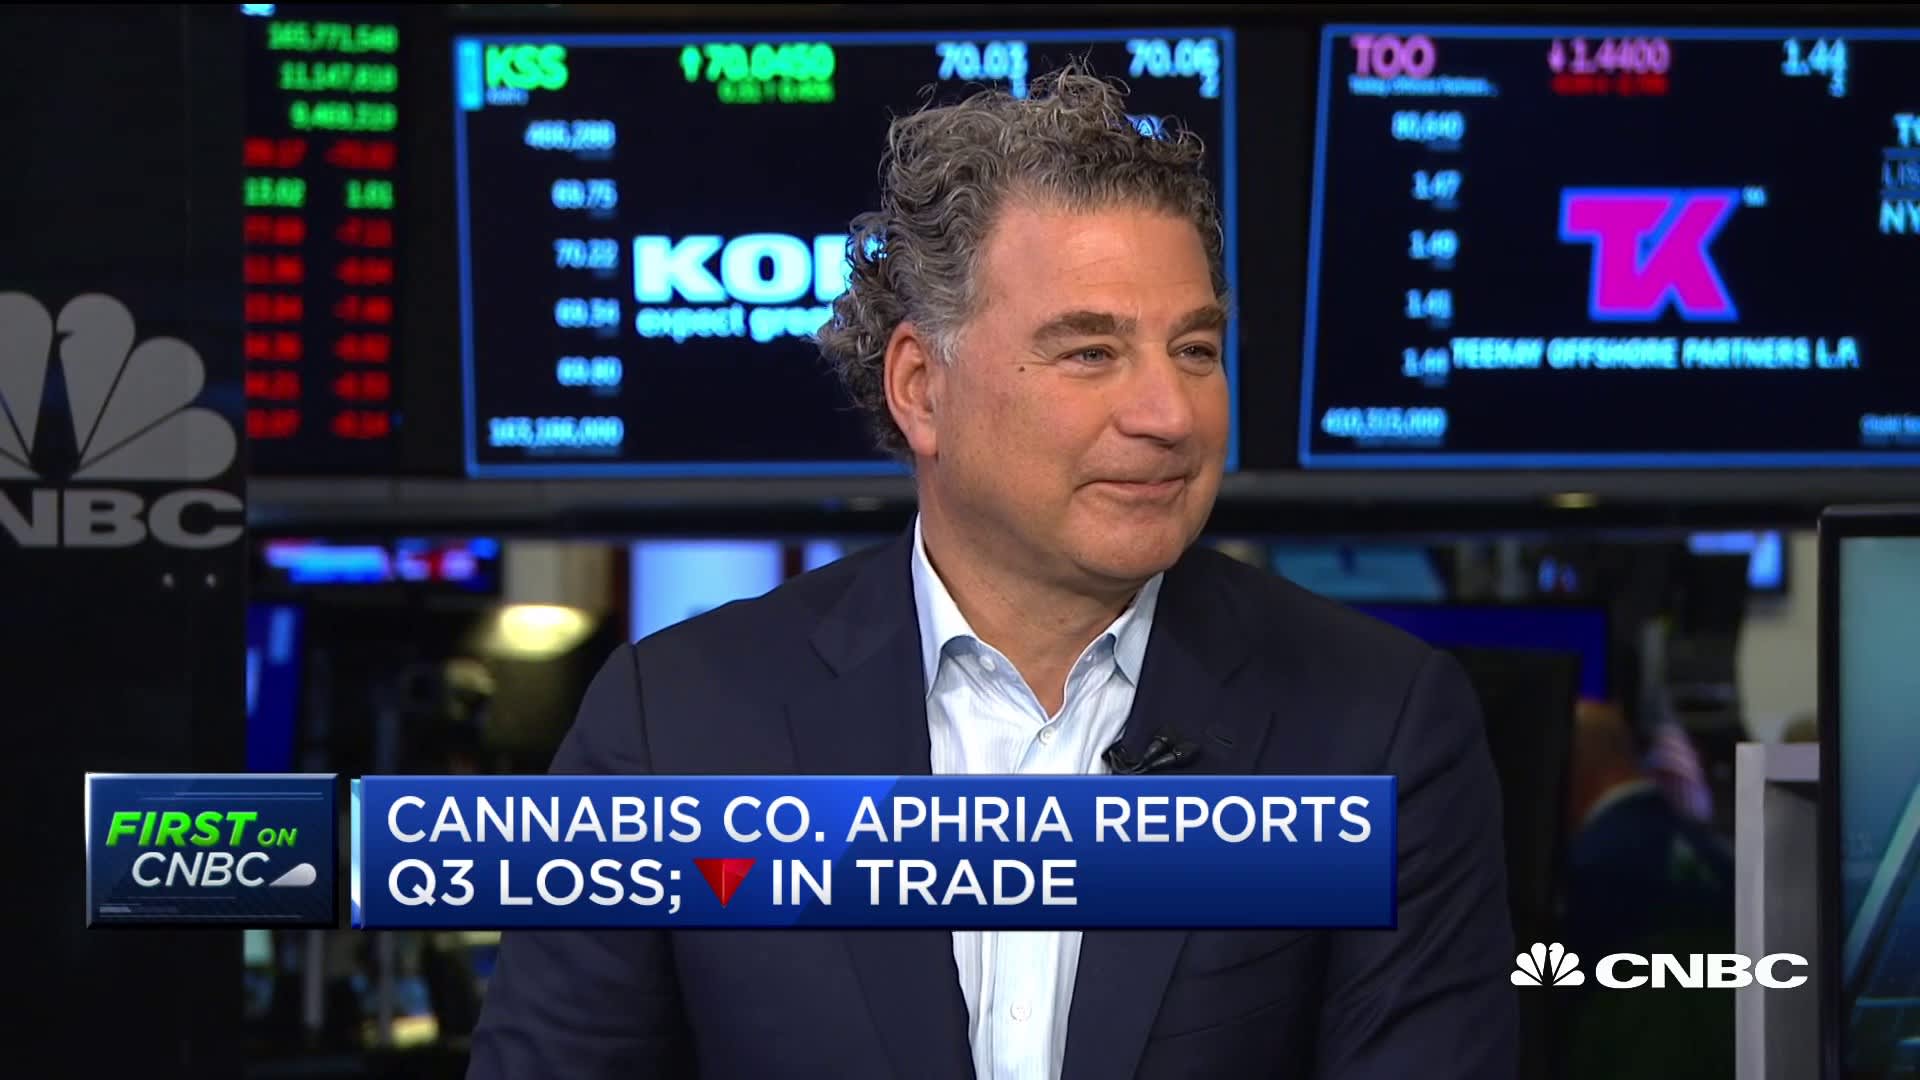 Watch CNBC's full interview with Aphria Chairman and interim CEO Irwin